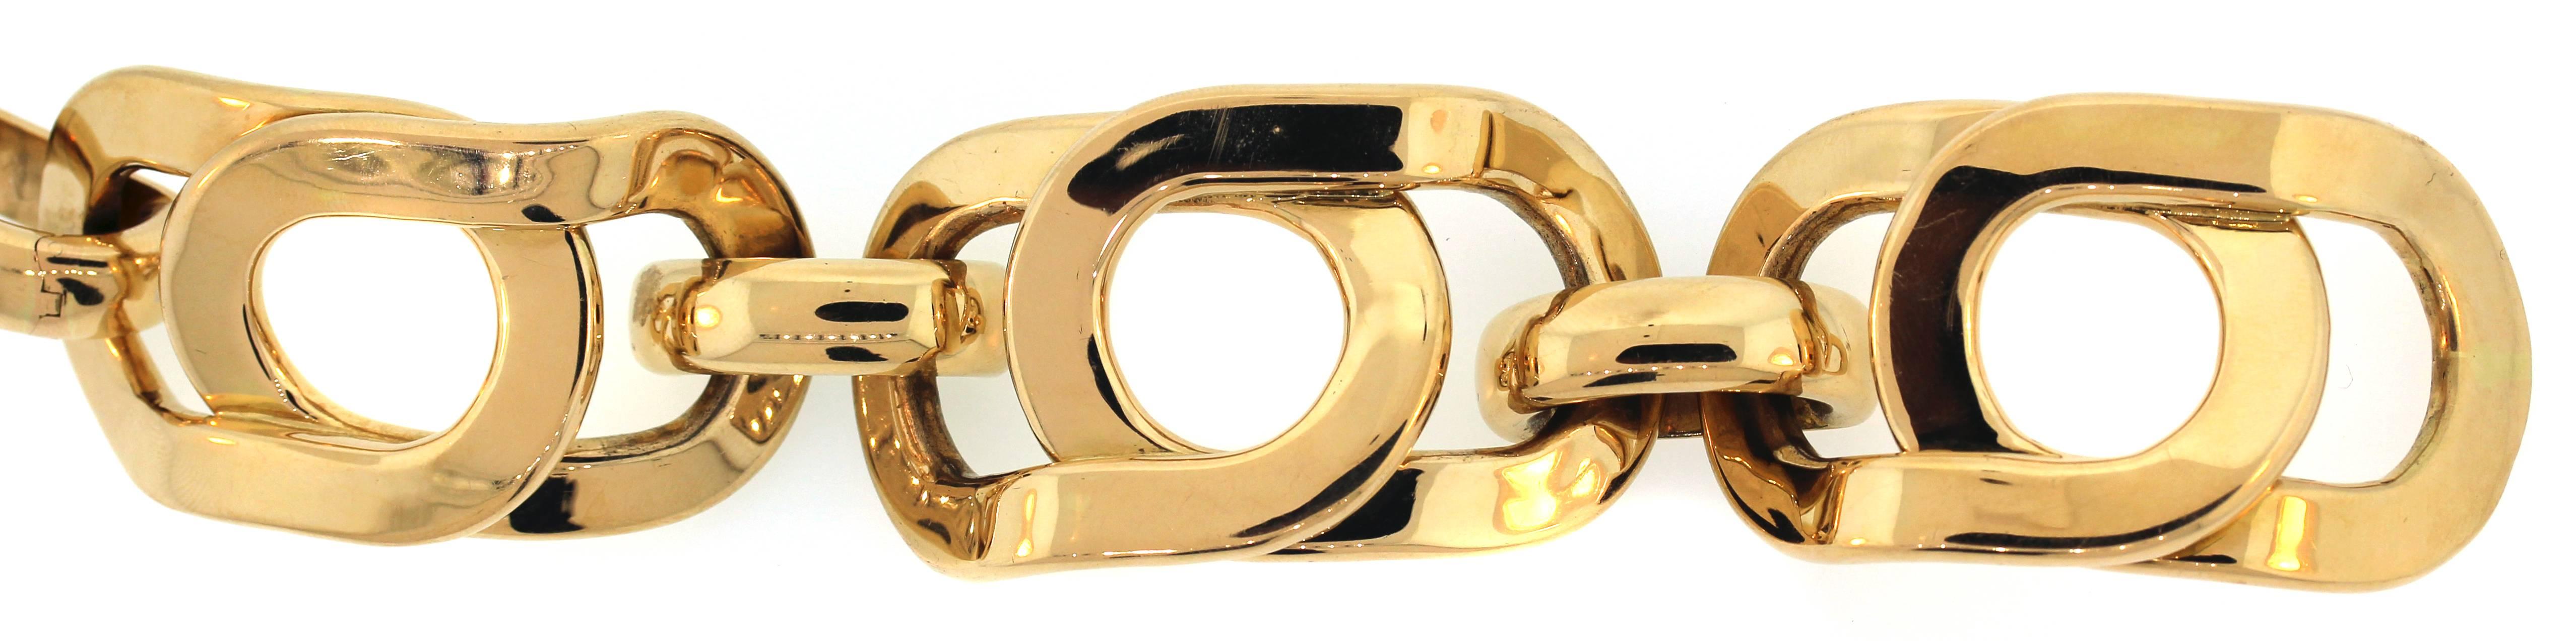 18K Yellow Gold Link Bracelet by Nicolas Cola

Three large links makeup bracelet with beautiful polish and shine

Bracelet is 7.5 inches in length and 1.35 inch width

Signed Nicolis Cola Italy